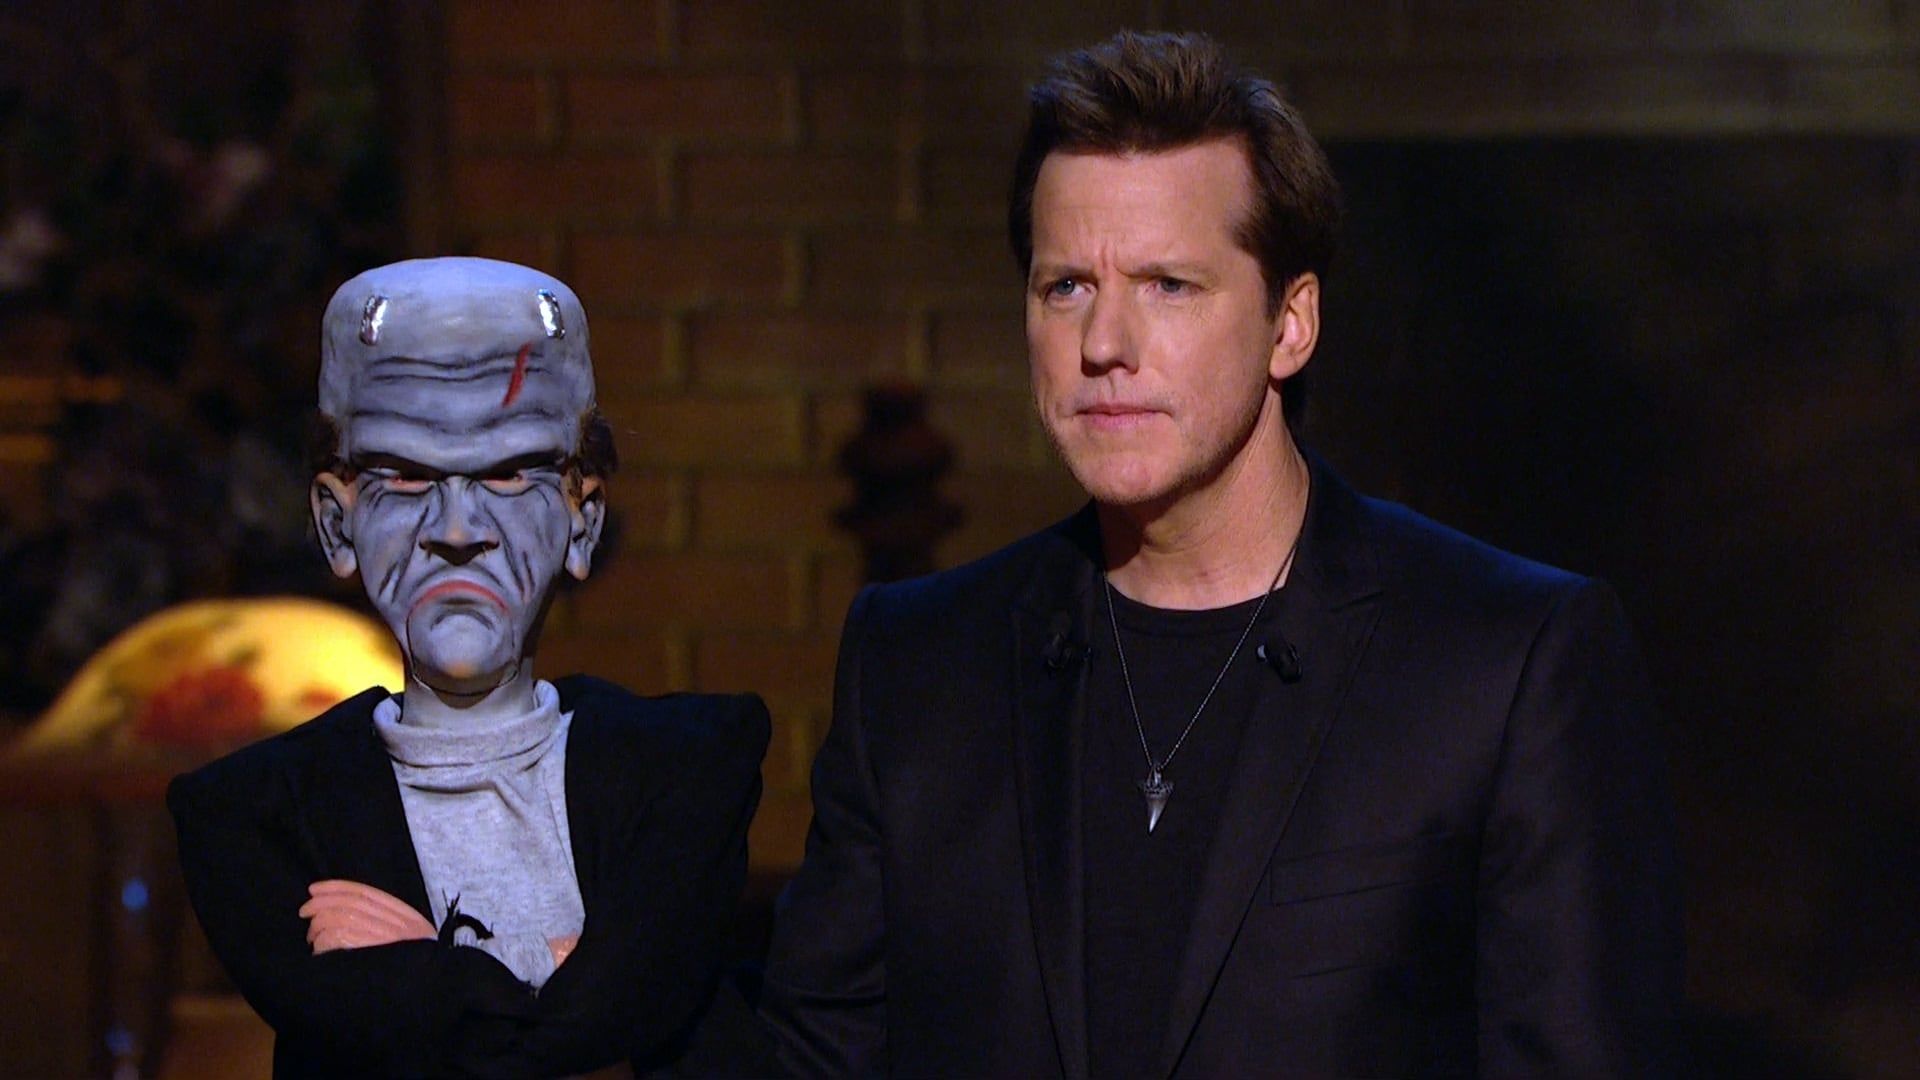 Jeff Dunham: Minding the Monsters background